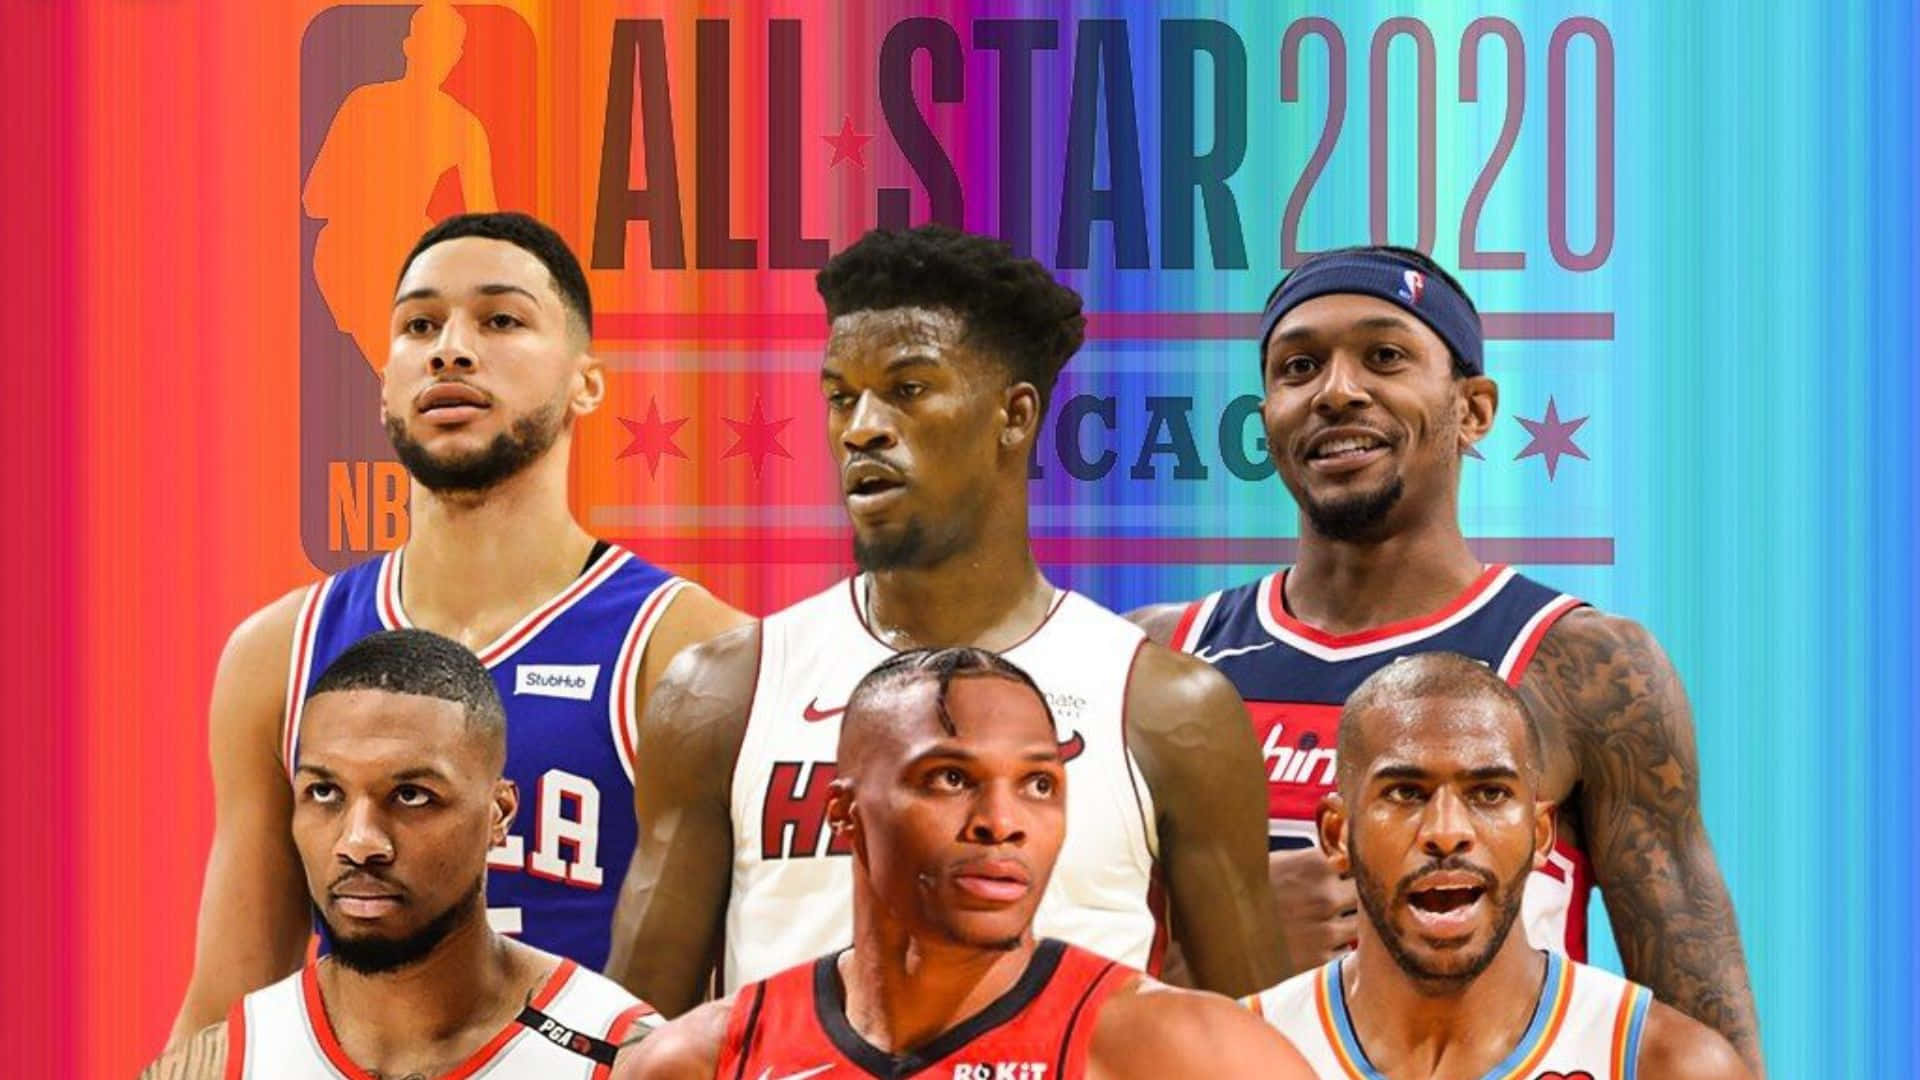 N B A All Star2020 Players Collage Wallpaper